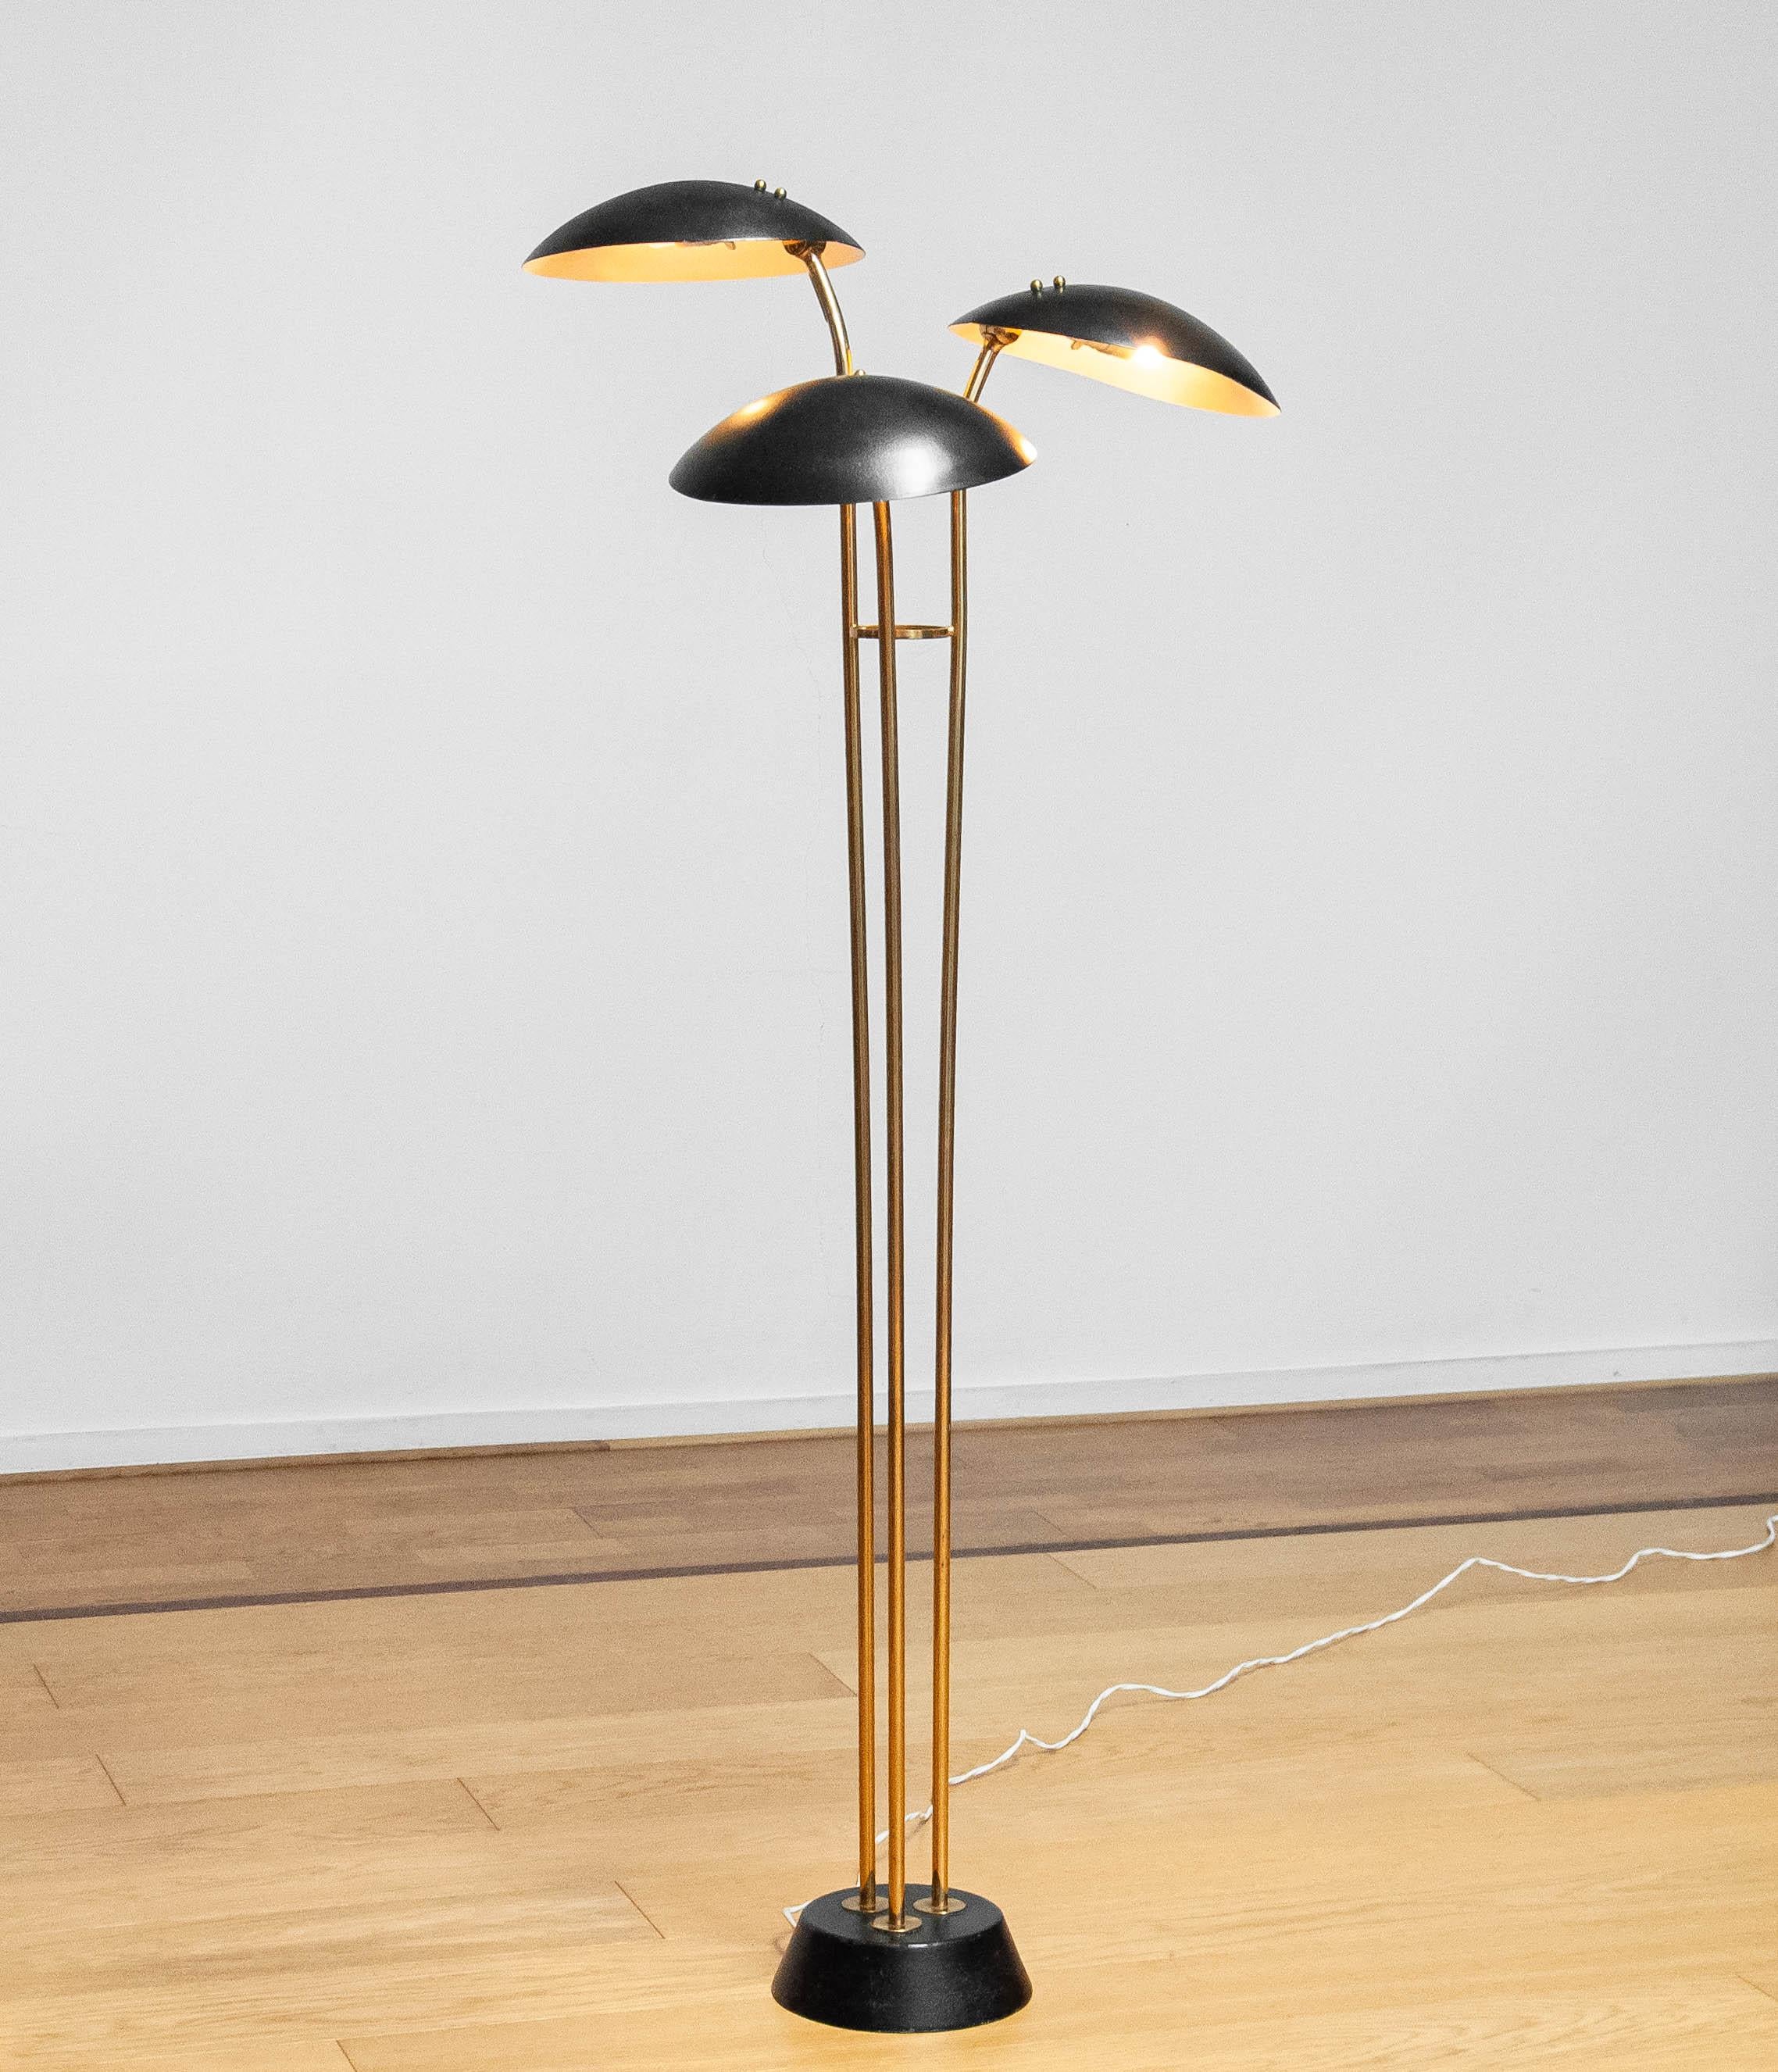 Beautiful and very rare brass floor lamp with three black lacquered metal scale shades ( Model: 74585 ) made by the Malmström brothers for Bröderna Malmströms metallvarufabrik in Malmö in Sweden in the 1950s. 
The elegant shape and design makes this